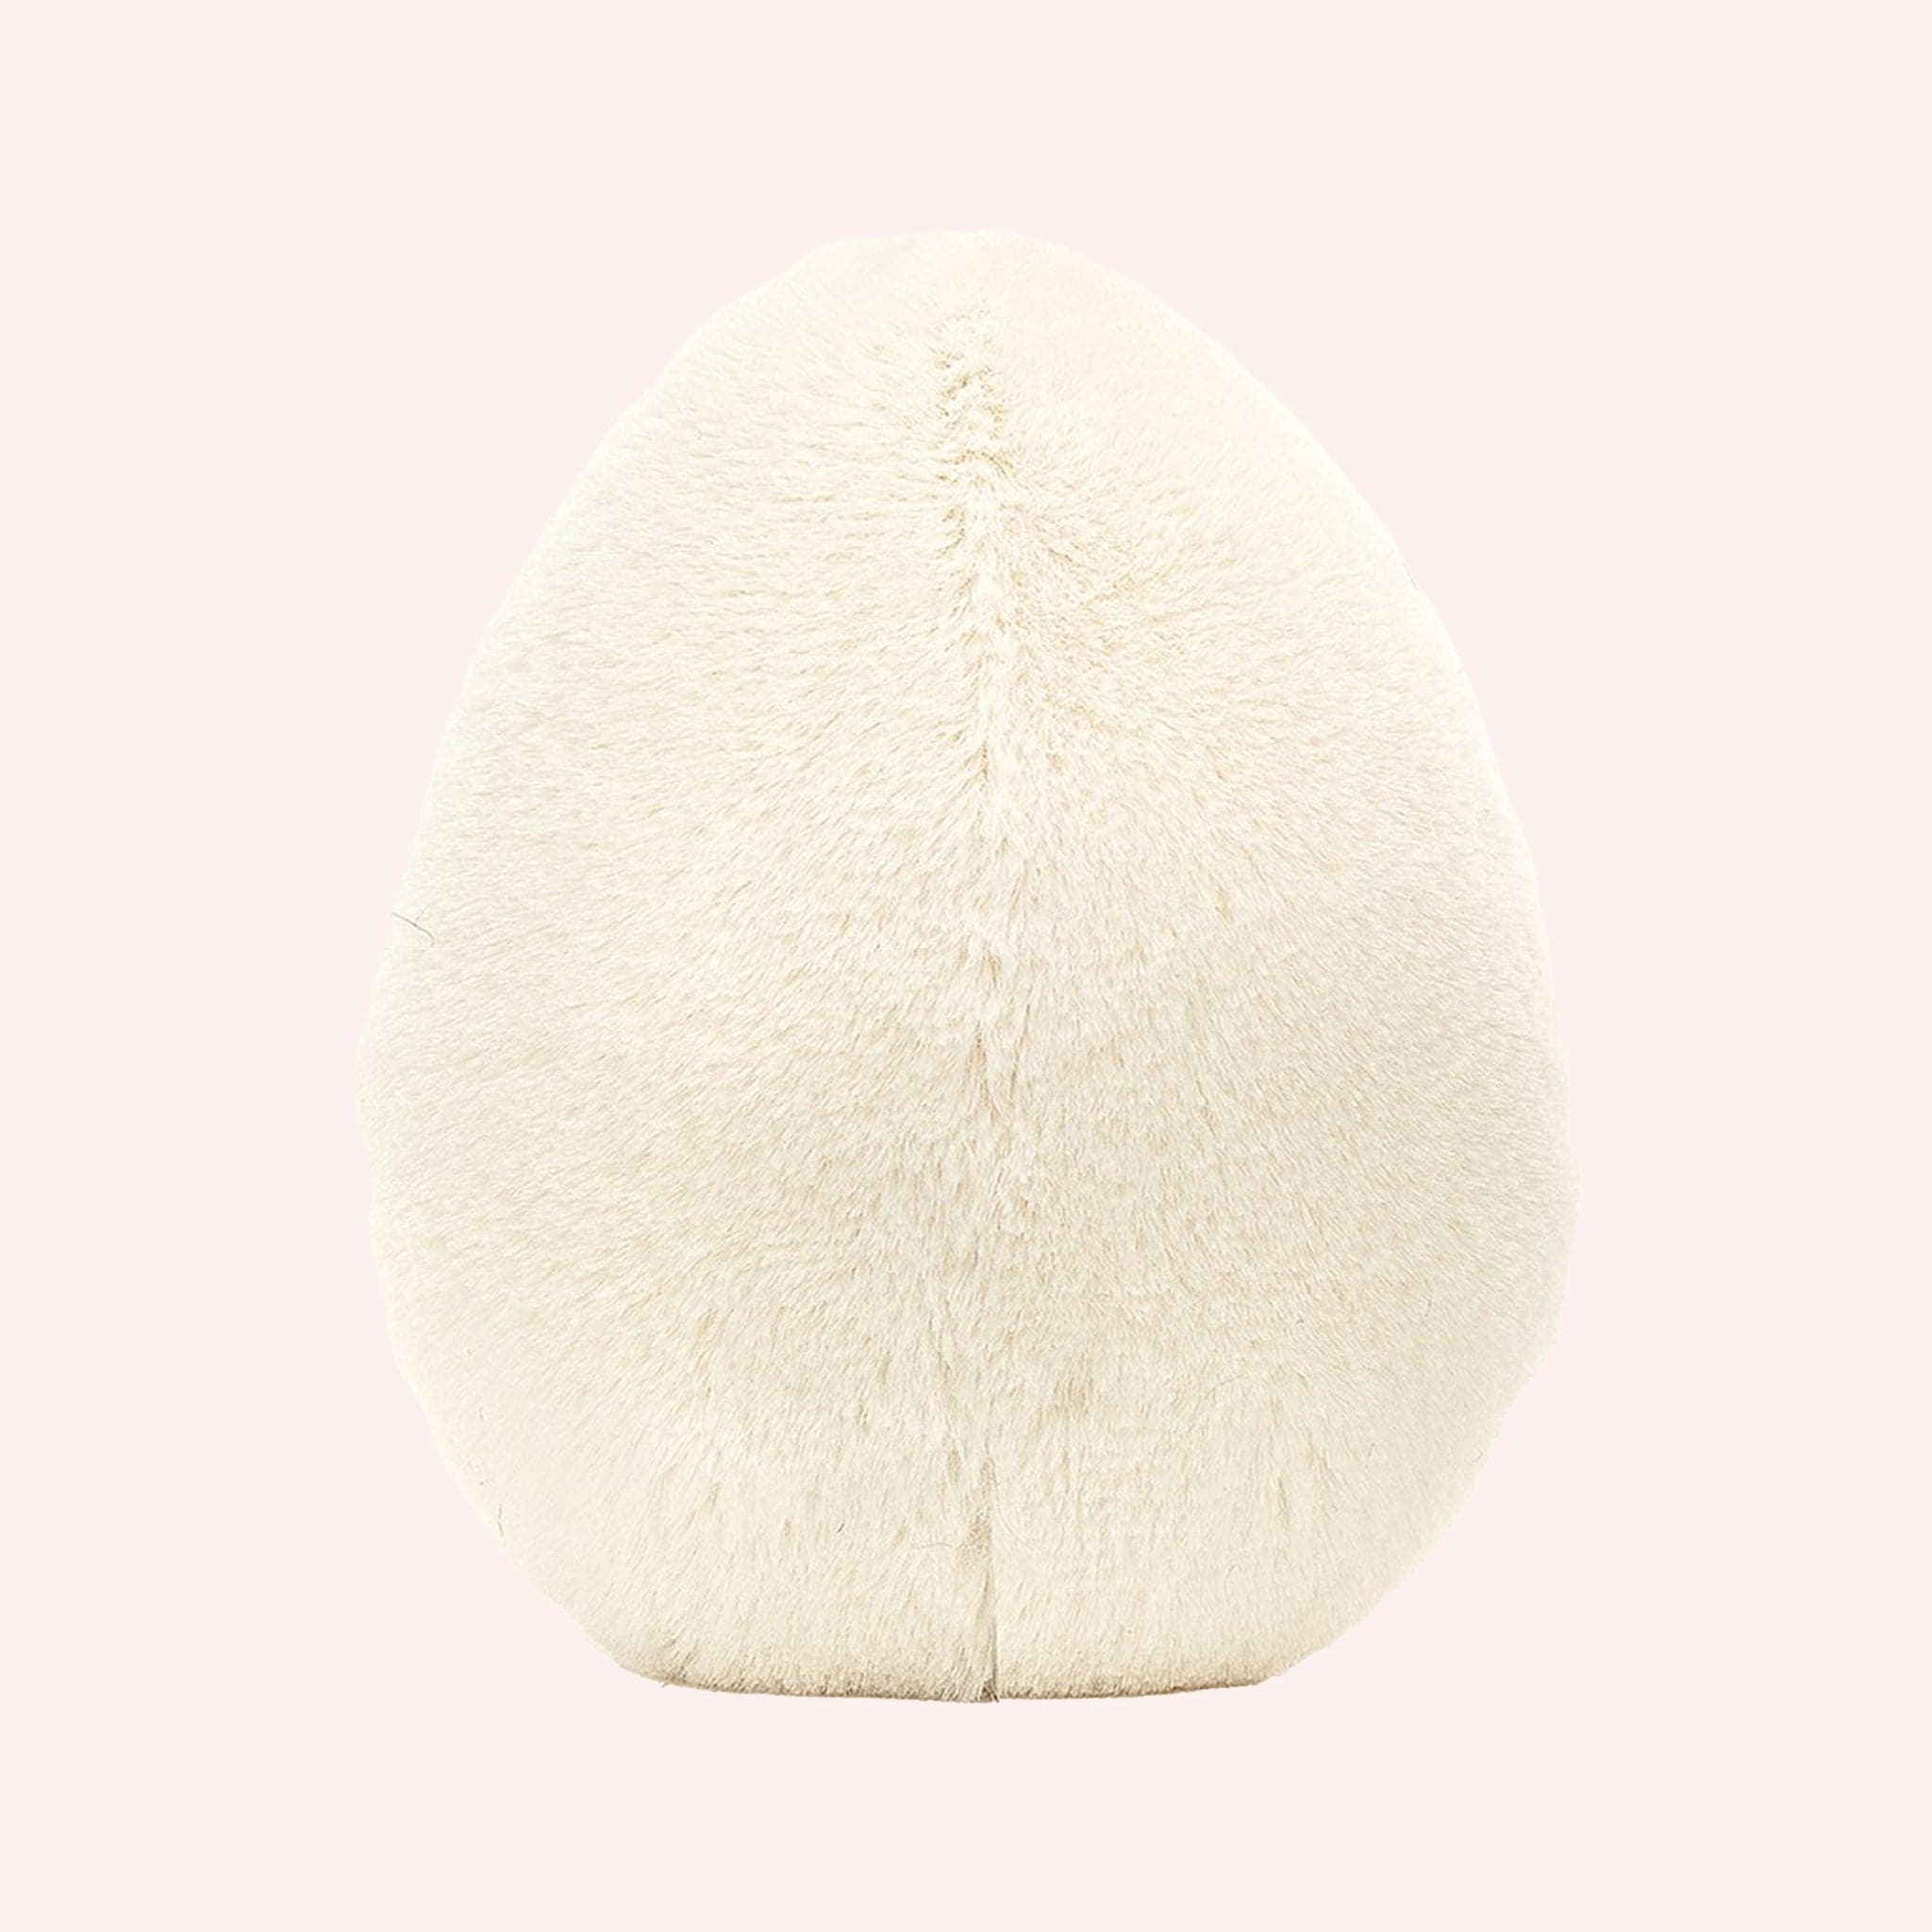 Back view of A soft stuffed animal in the shape of an egg with yellow yoke face and blushing smiley face, and brown floppy legs.